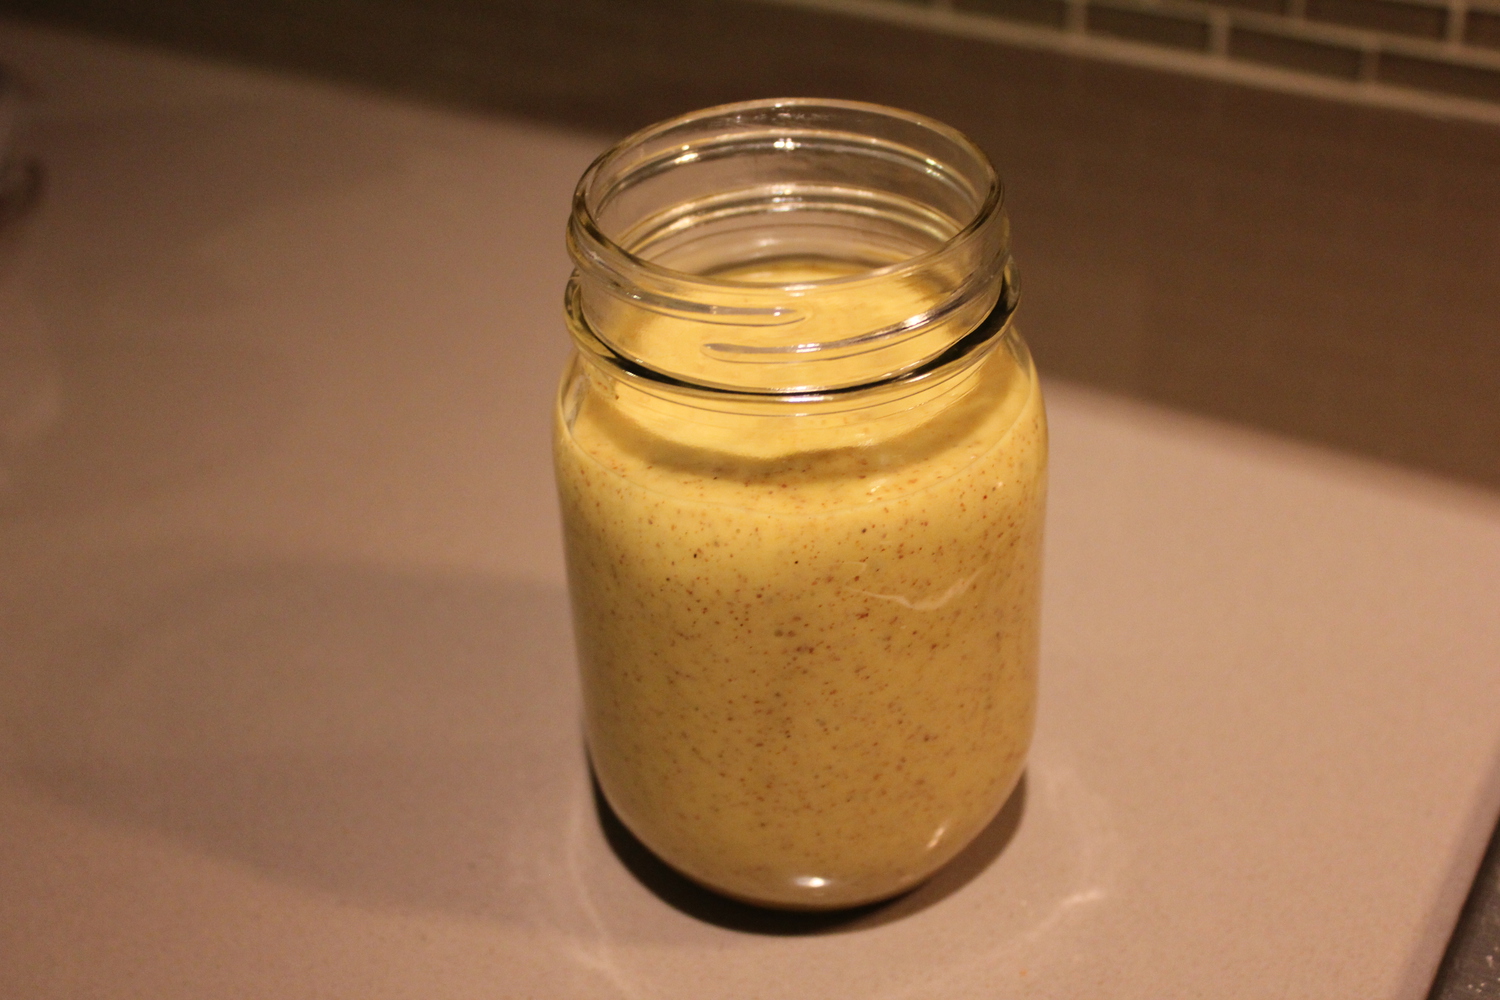 Honey Dijon dressing is quickly made in a blender